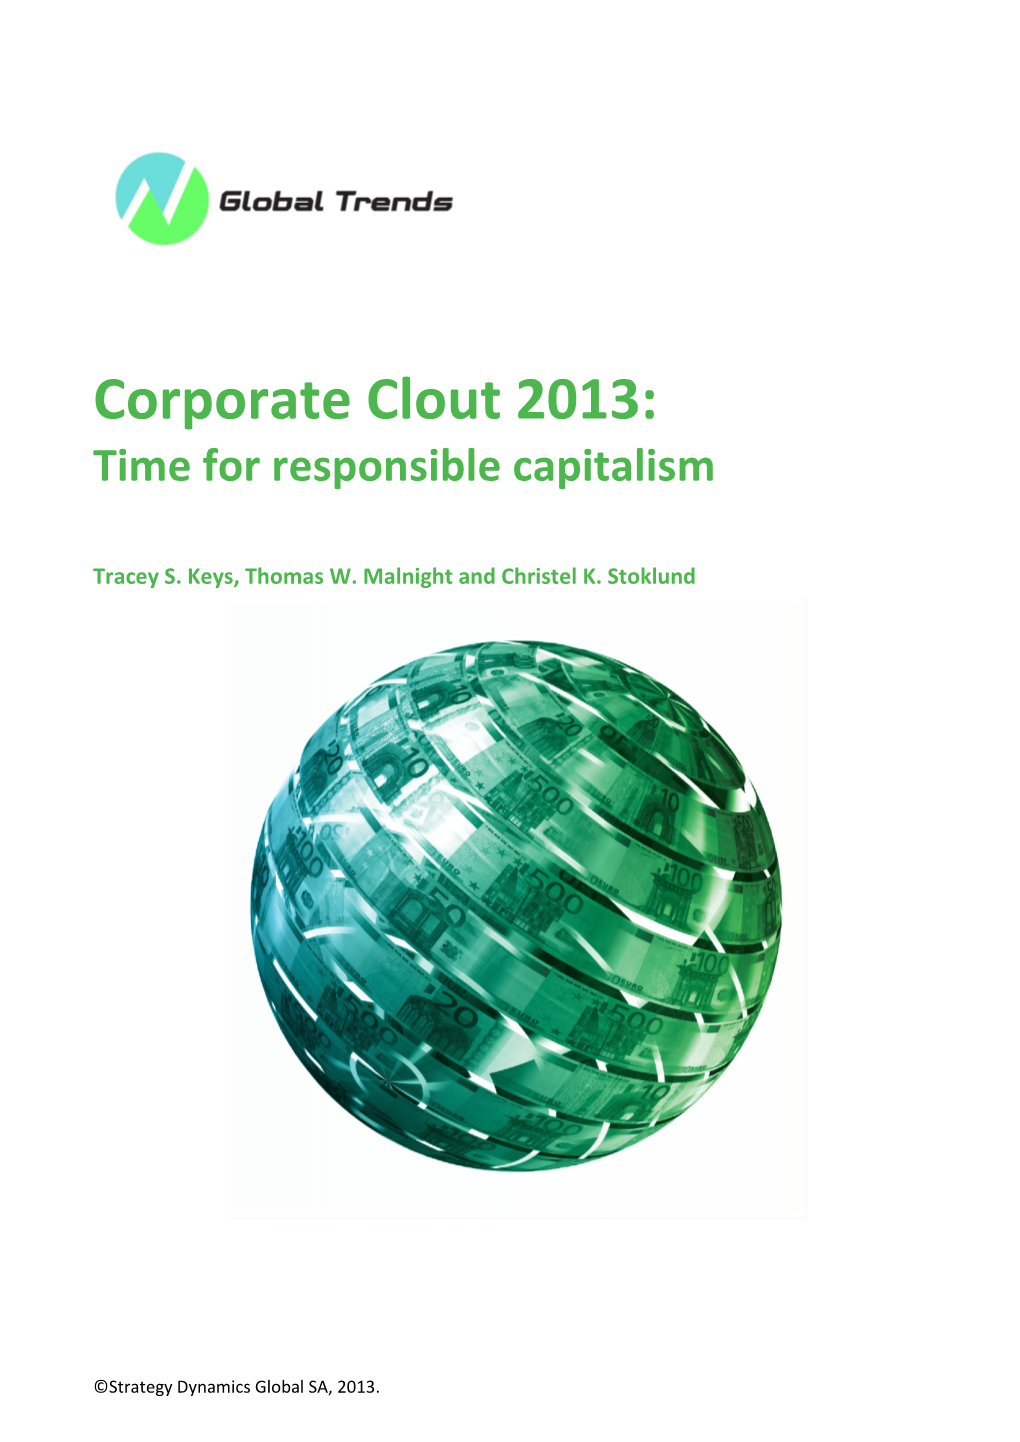 Corporate Clout 2013: Time for Responsible Capitalism